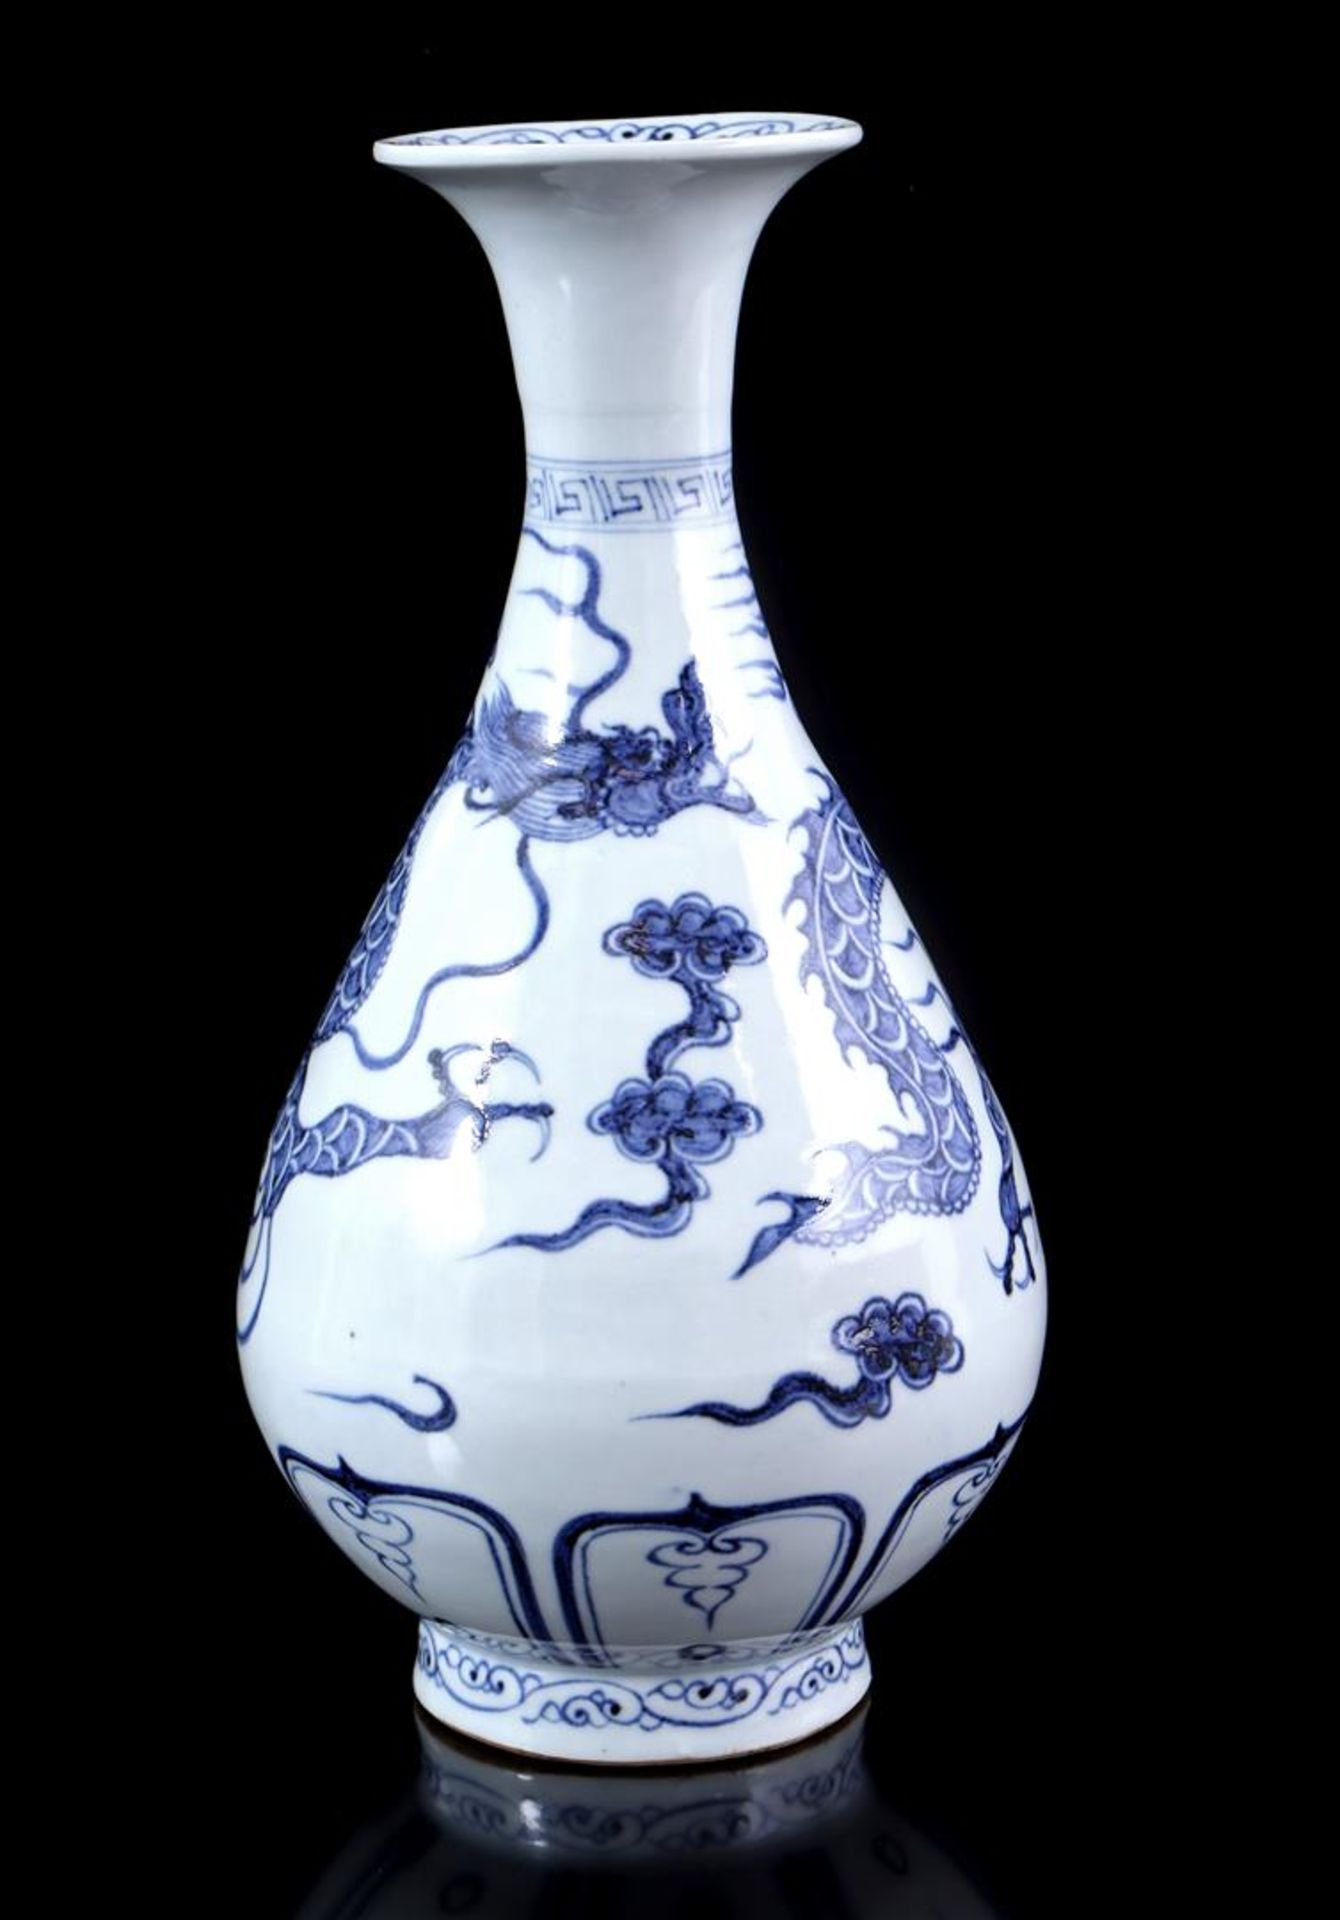 Porcelain collar vase with blue and white